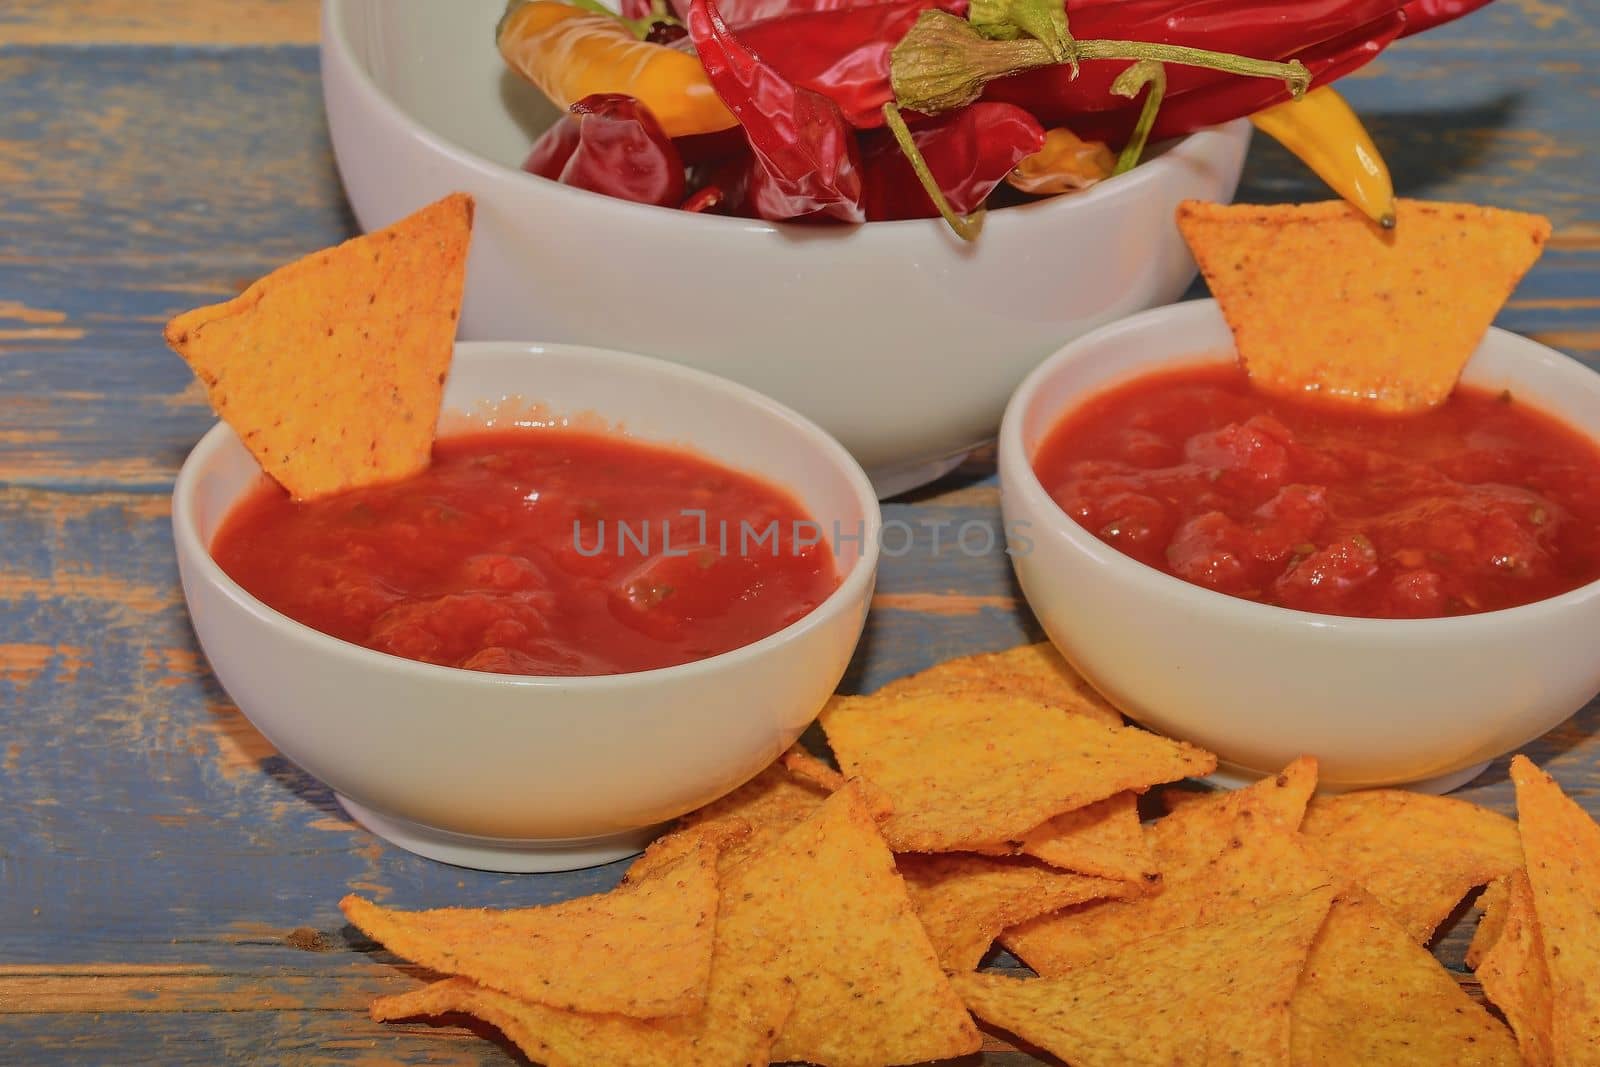 Chili corn-chips with salsa dip and chili peppers on wooden background by roman_nerud